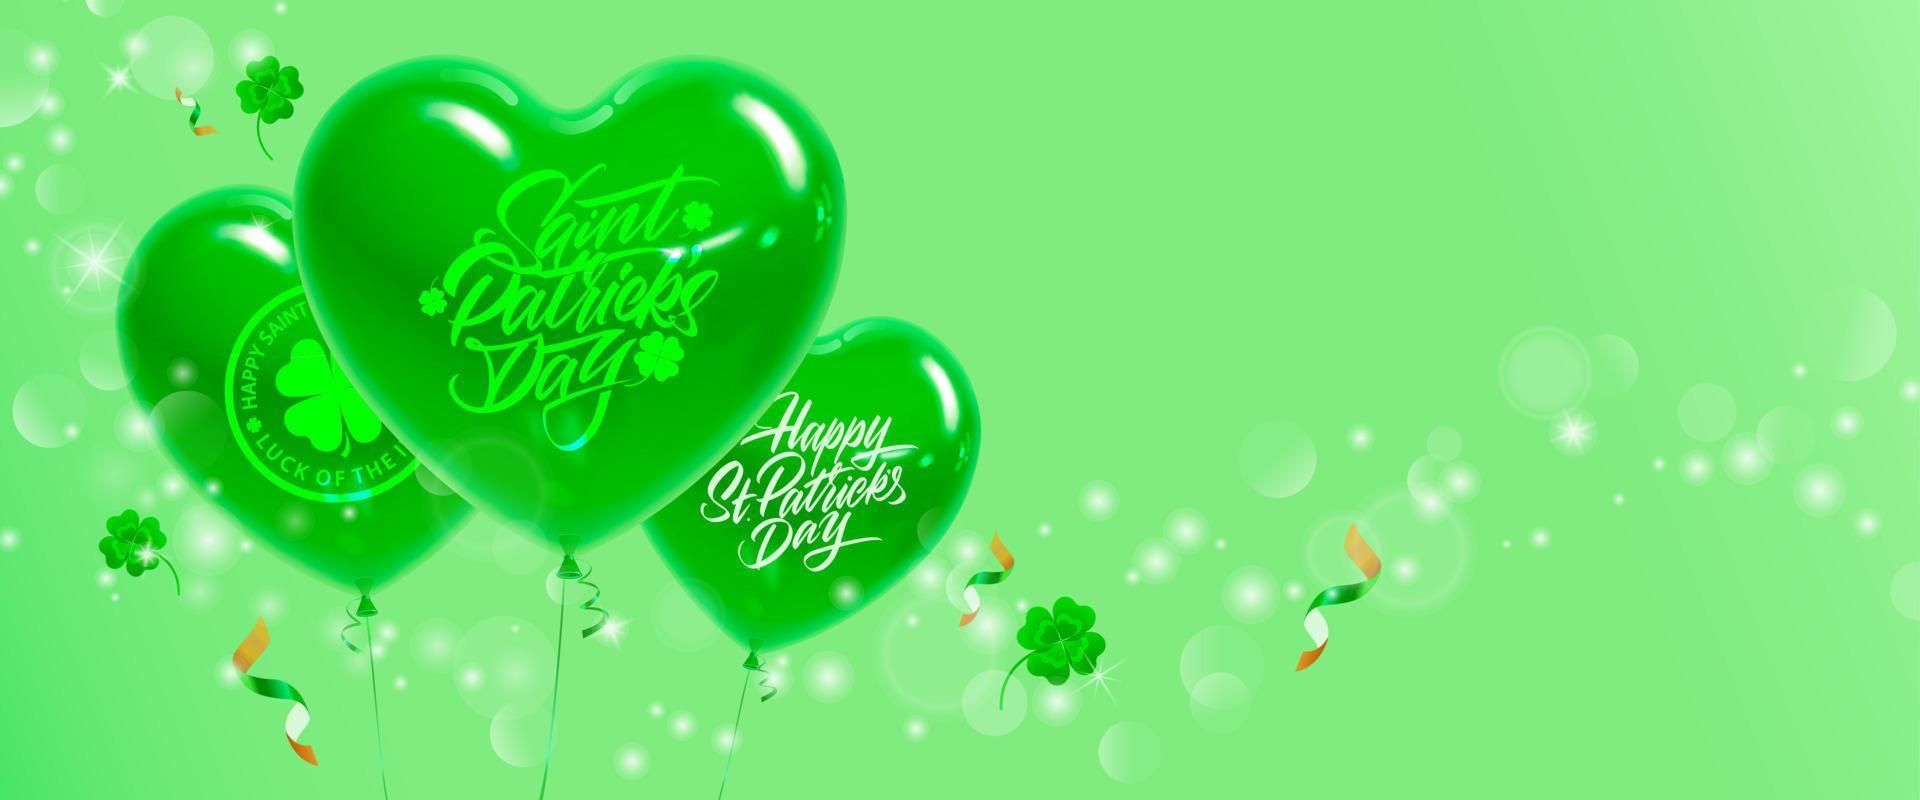 Horizontal festive banner with space for your text. Balloons, candy and clover for St. Patrick's Day celebration. Vector illustration